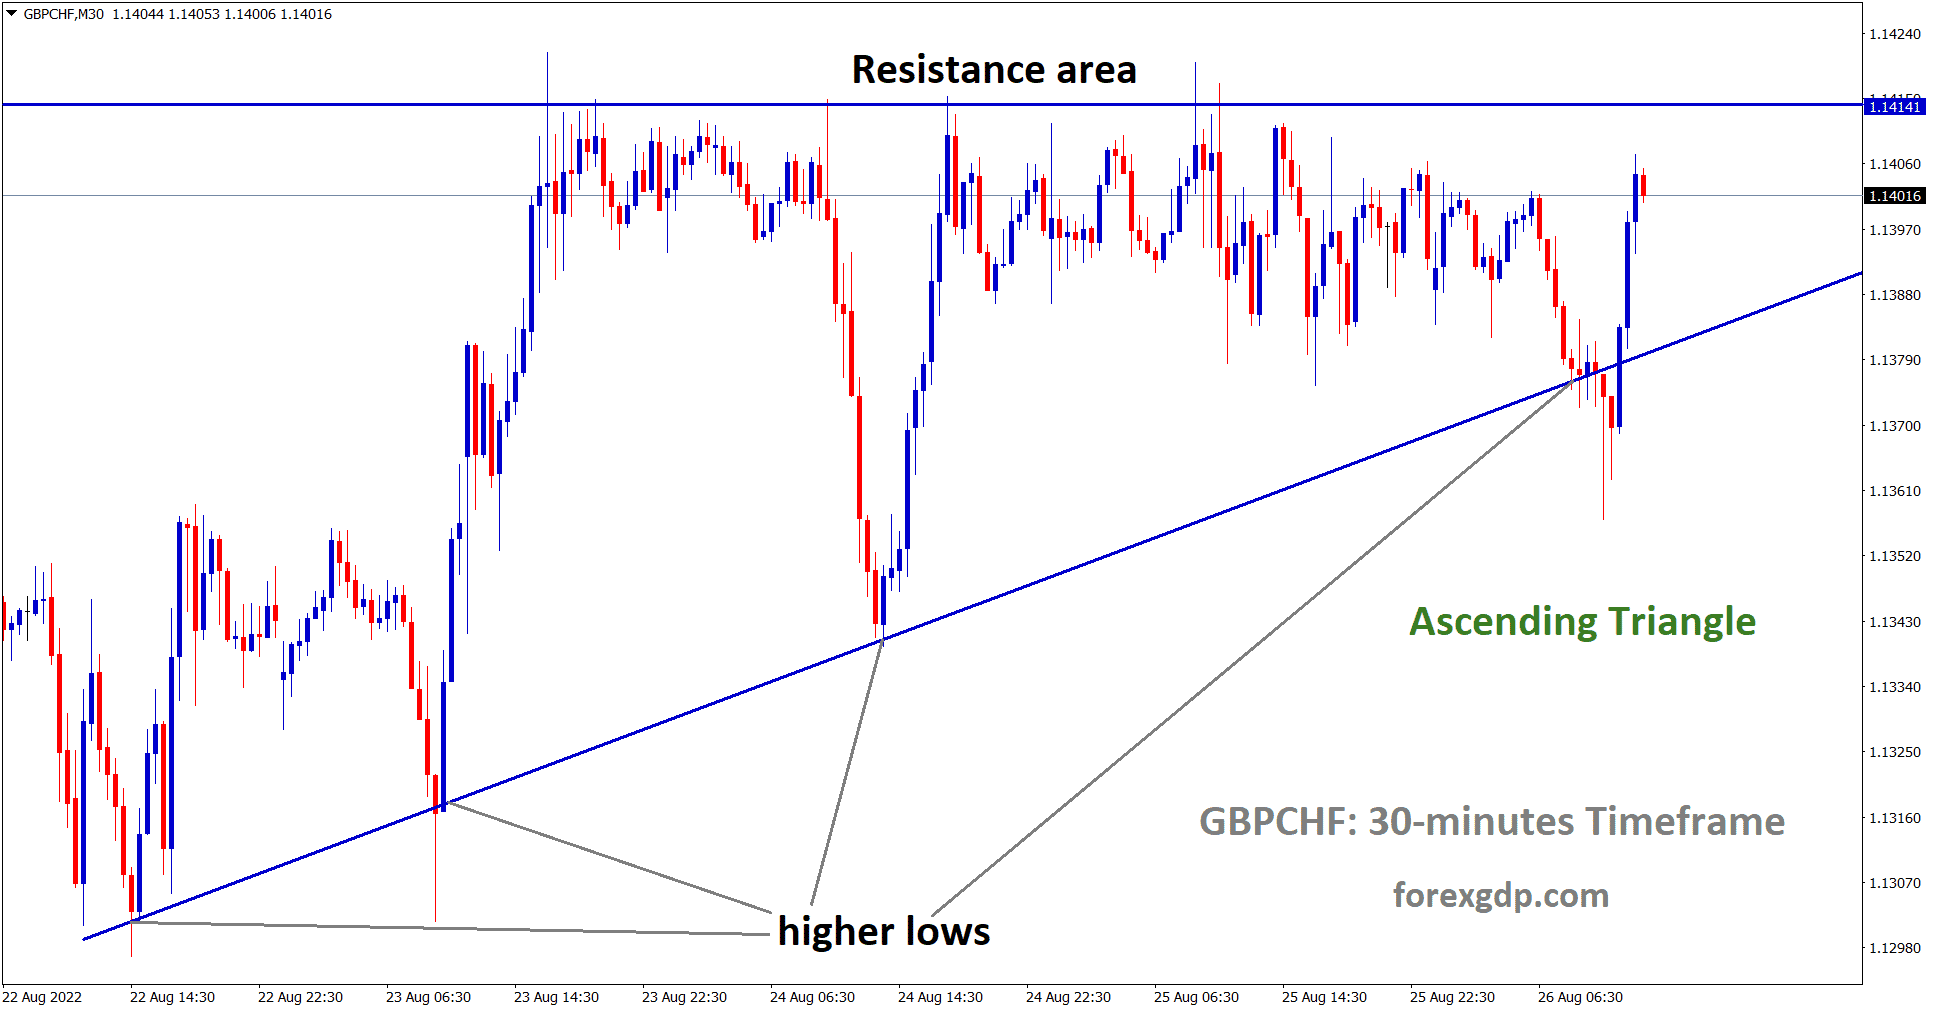 GBPCHF is moving in an Ascending triangle pattern.